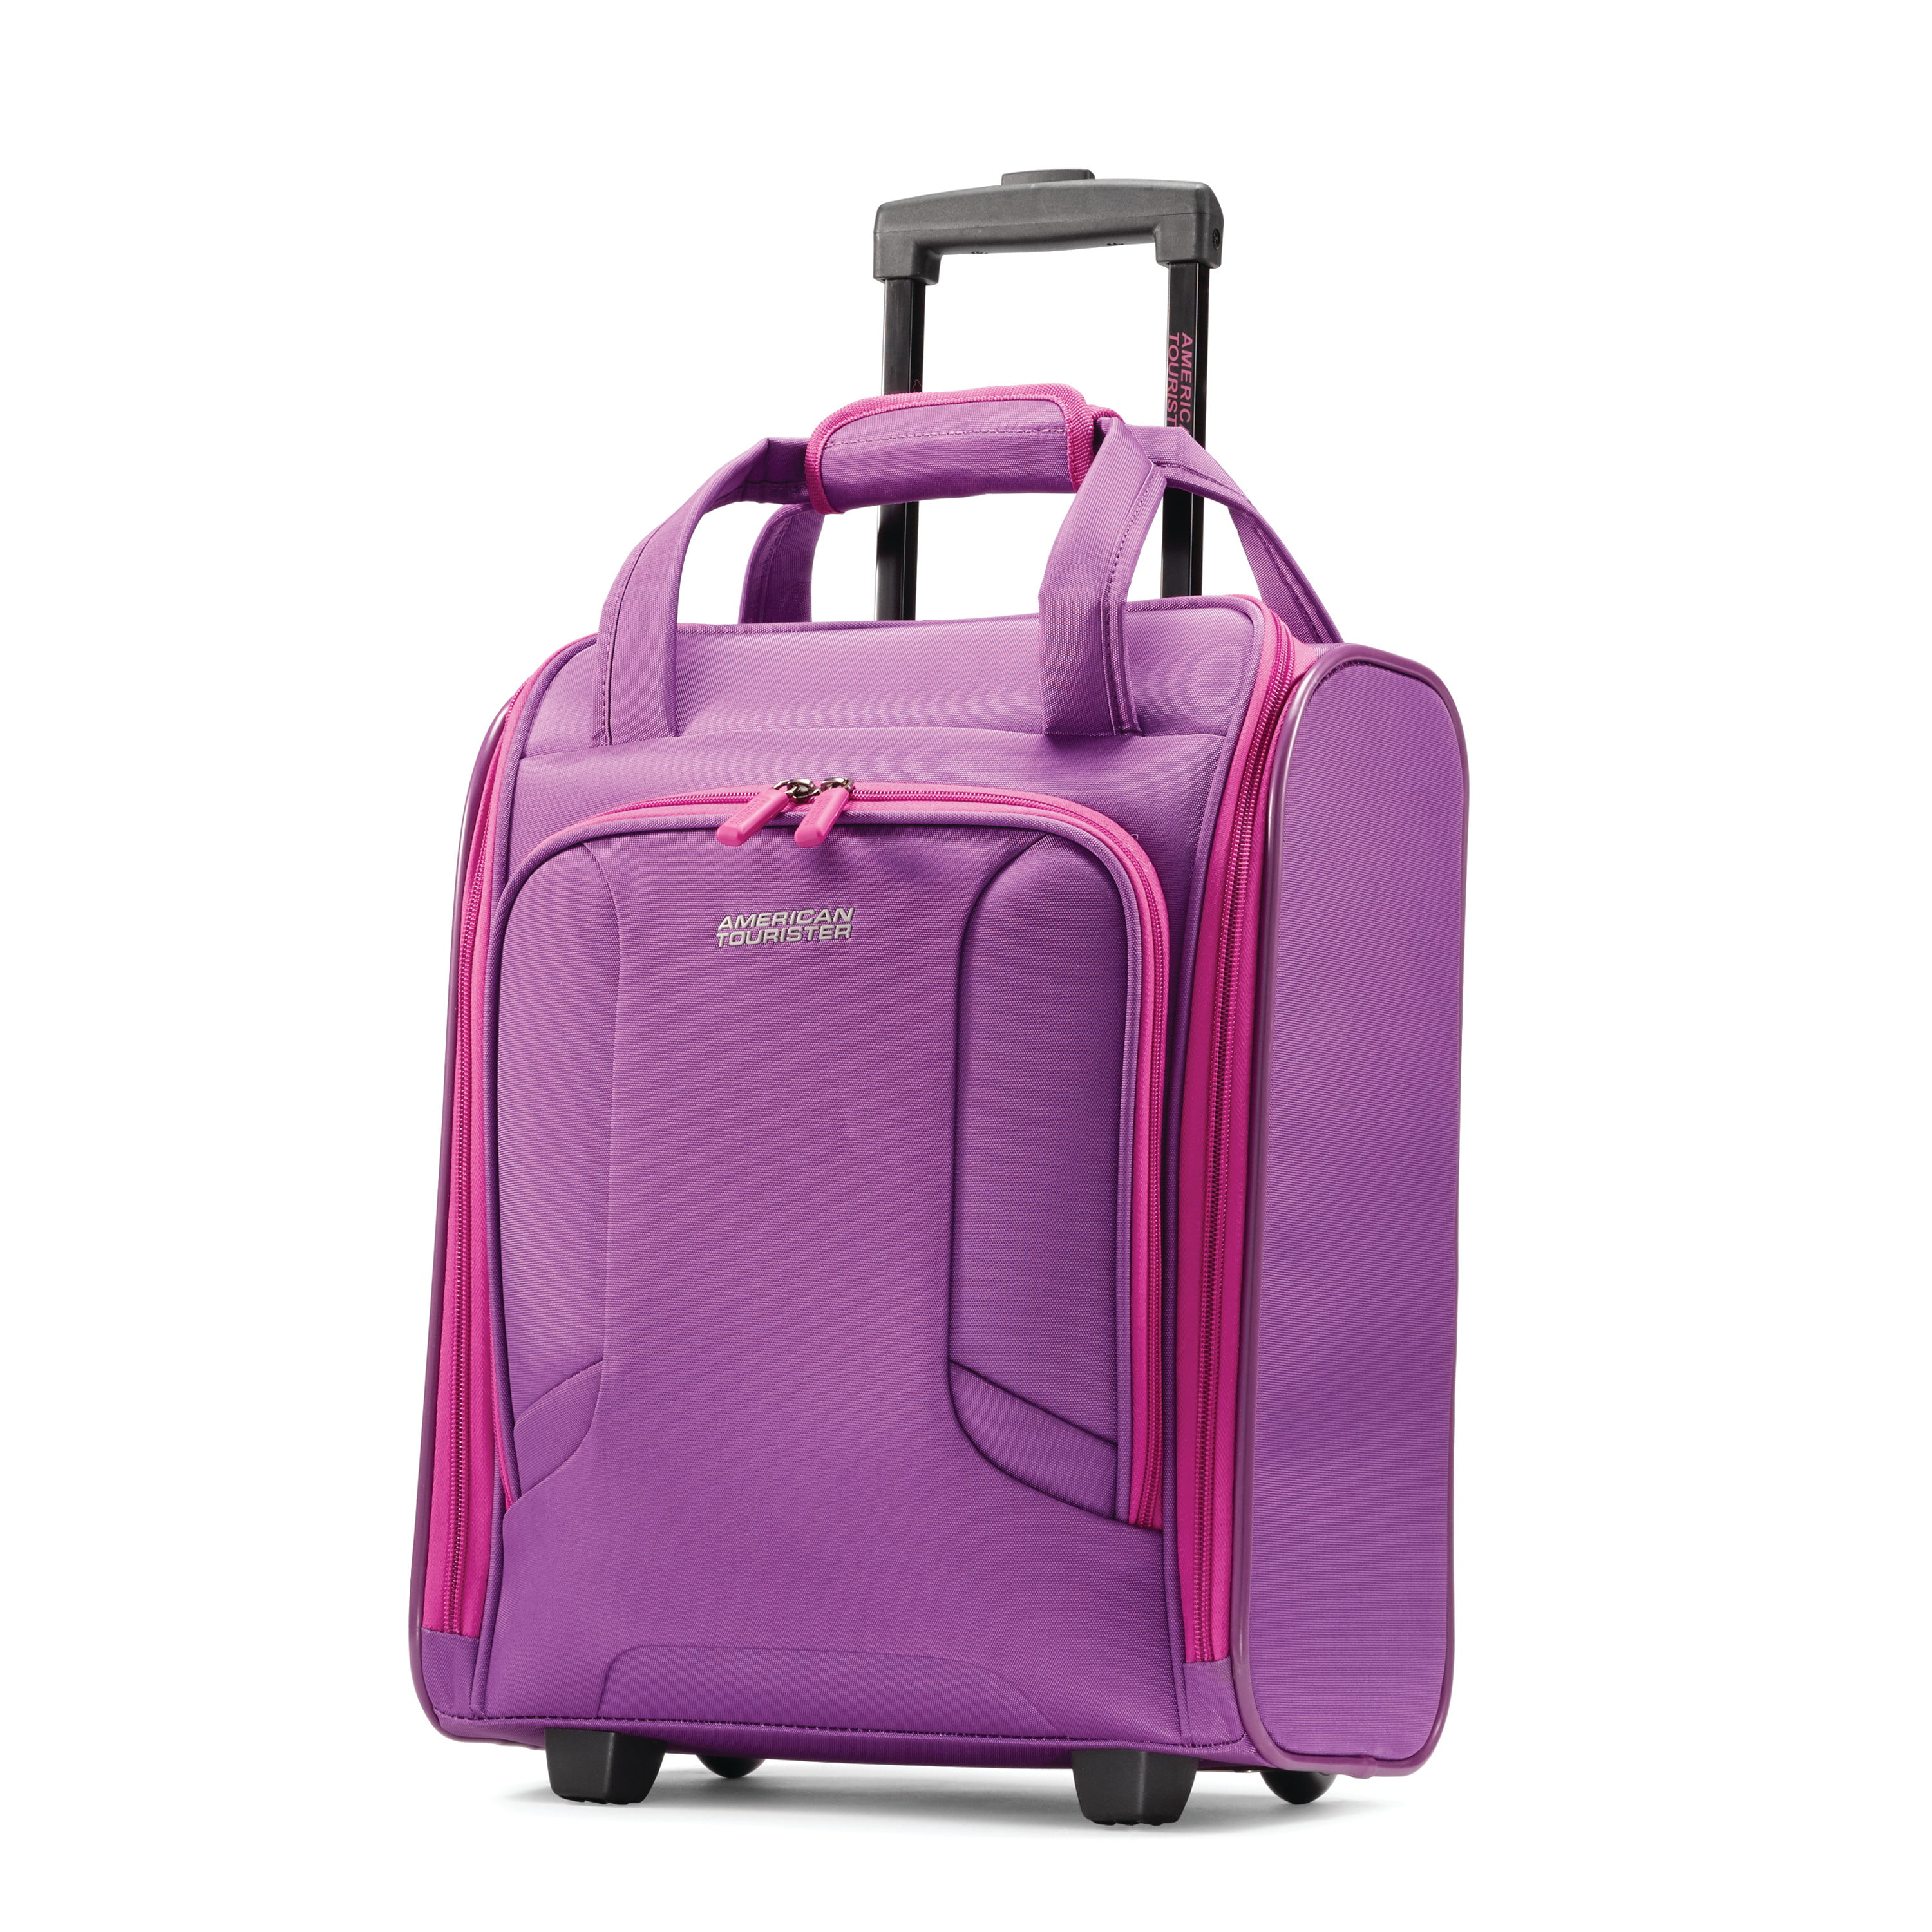 american tourister 16 spinner tote